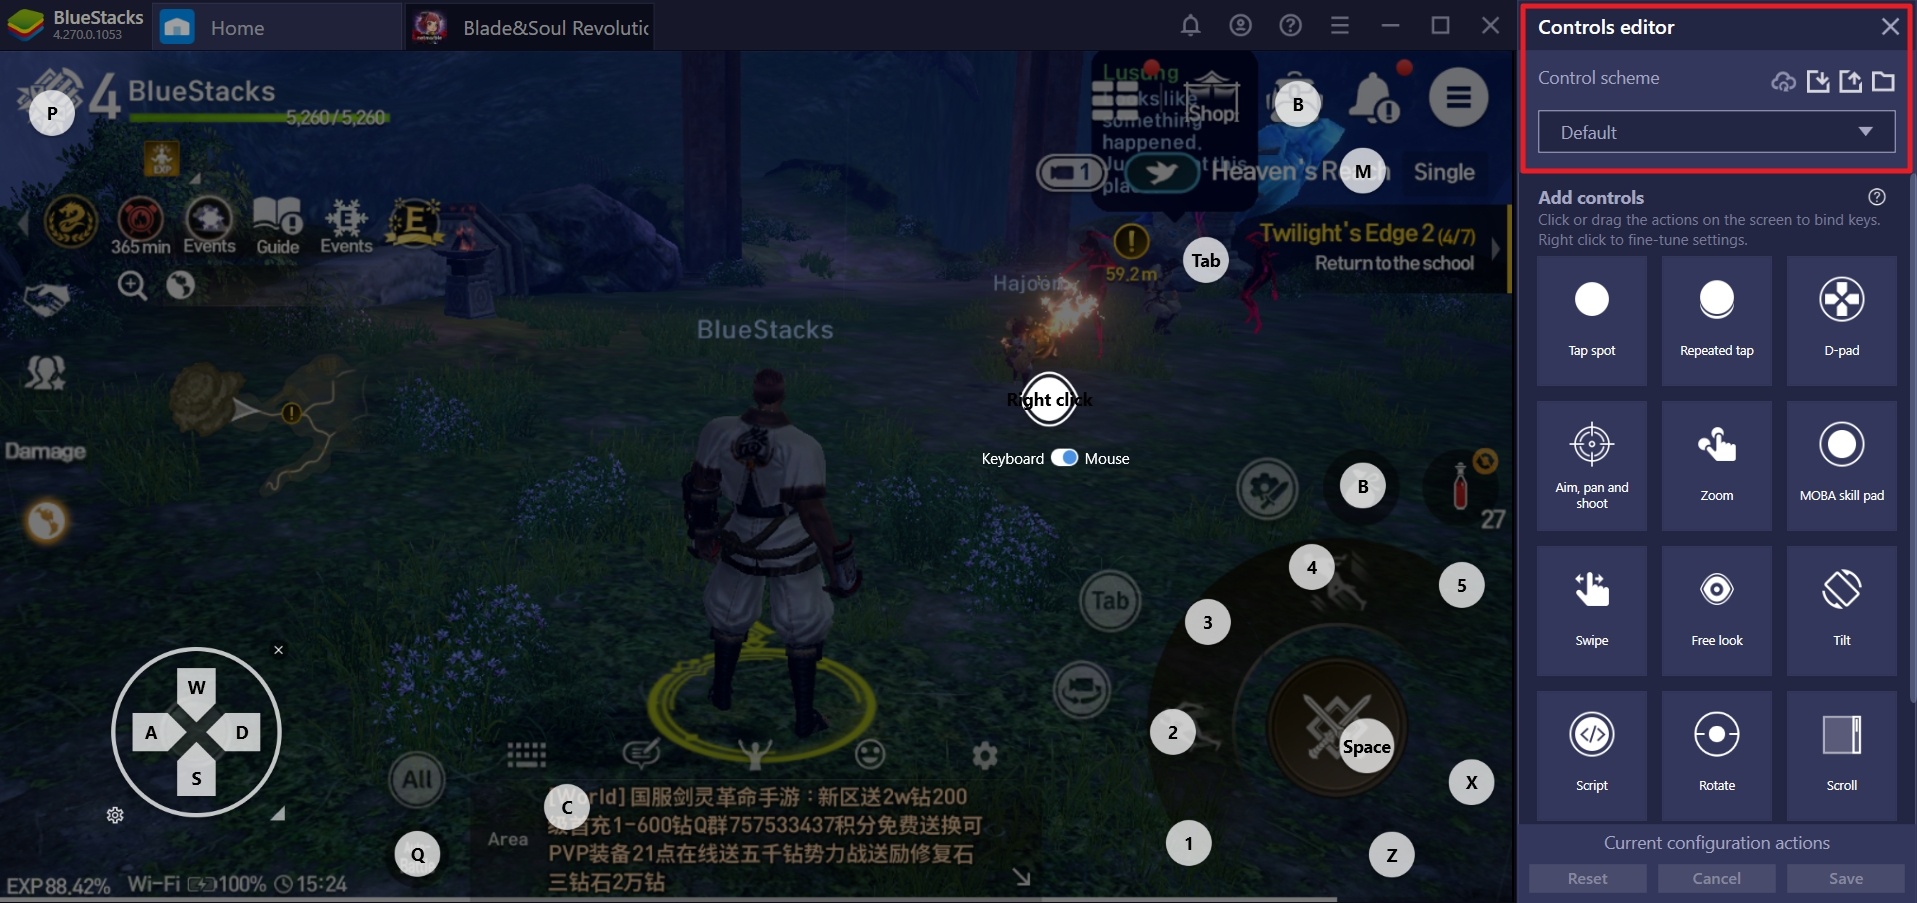 How to Play Blade & Soul: Revolution on PC with BlueStacks